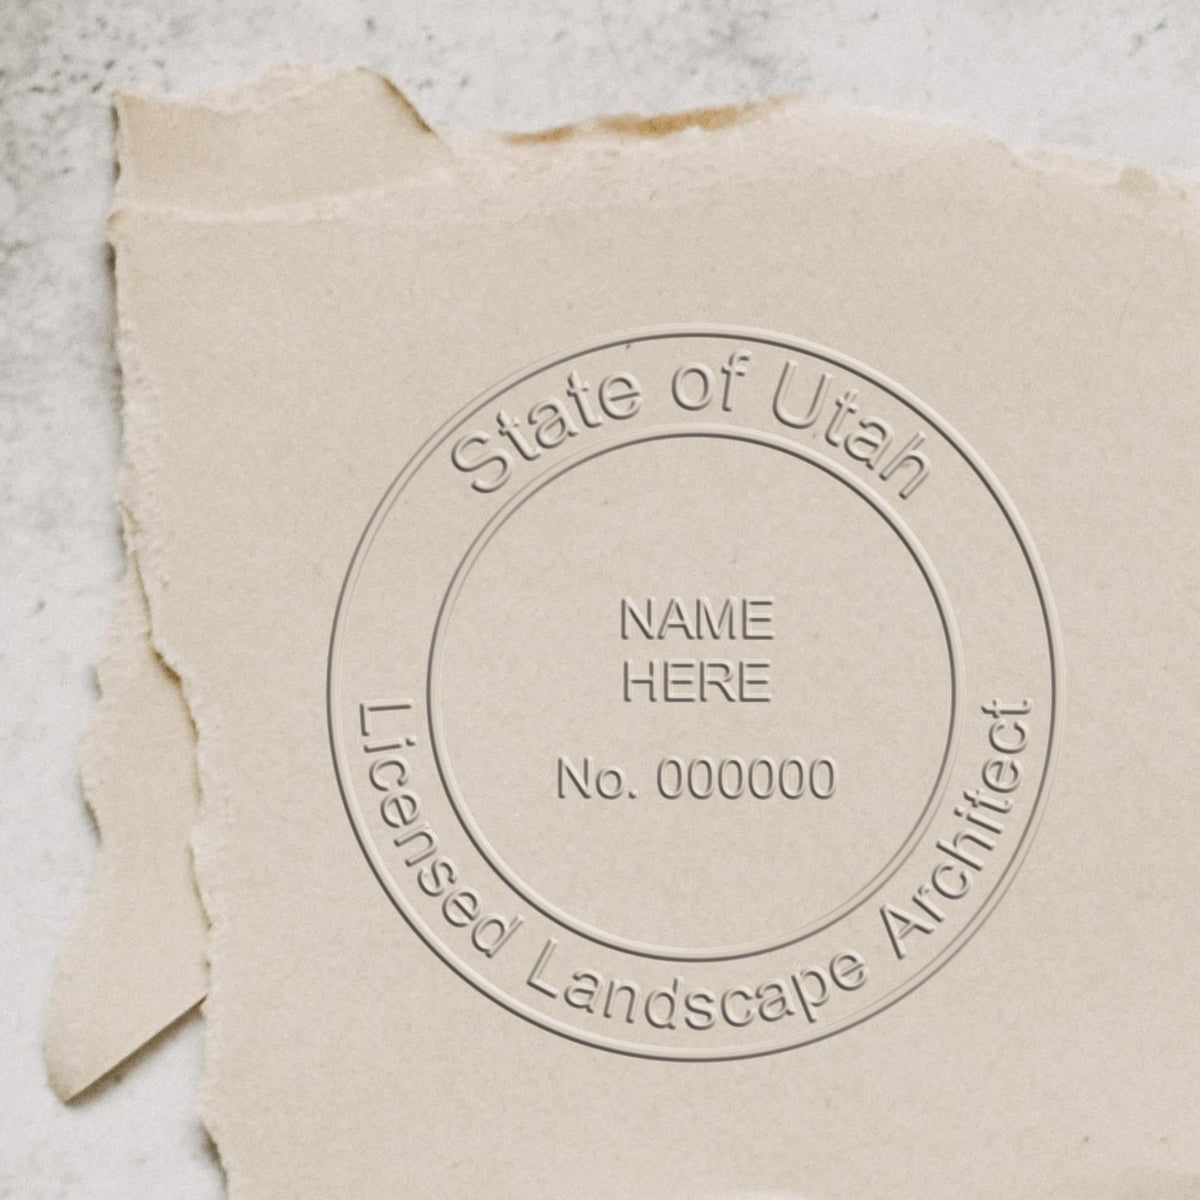 A photograph of the Hybrid Utah Landscape Architect Seal stamp impression reveals a vivid, professional image of the on paper.